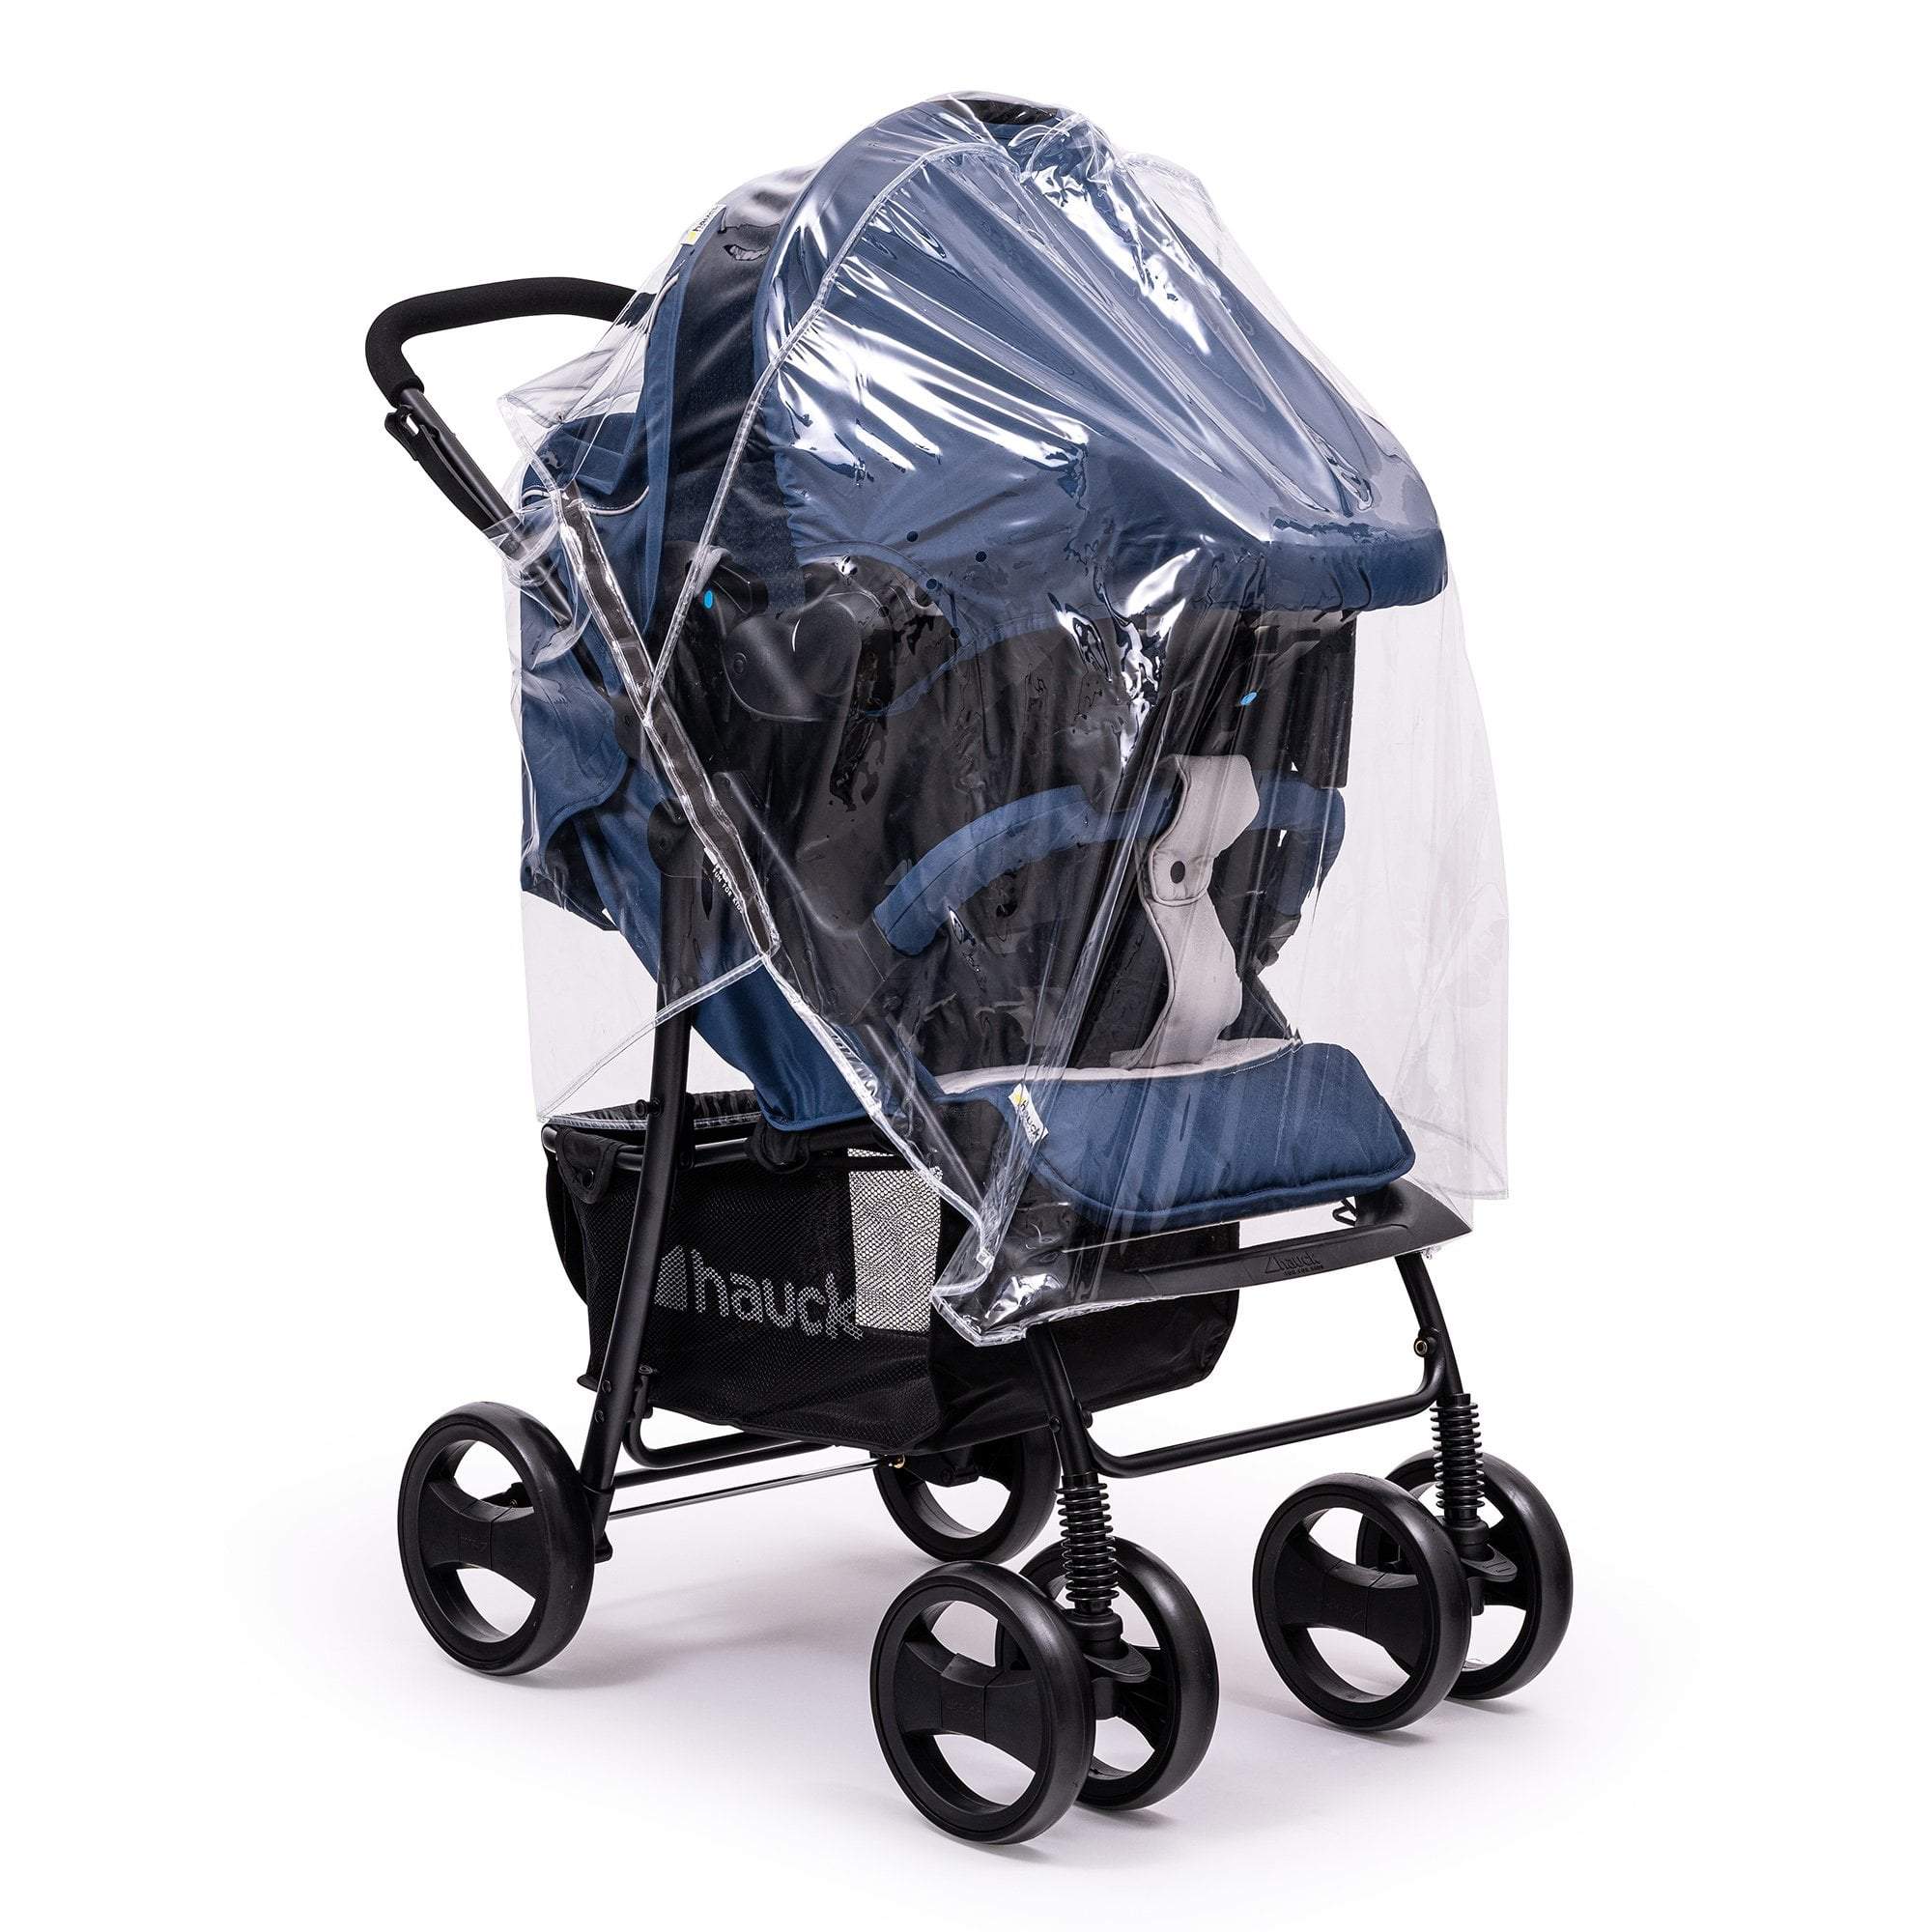 Travel System Raincover Compatible with BOB - Fits All Models - For Your Little One